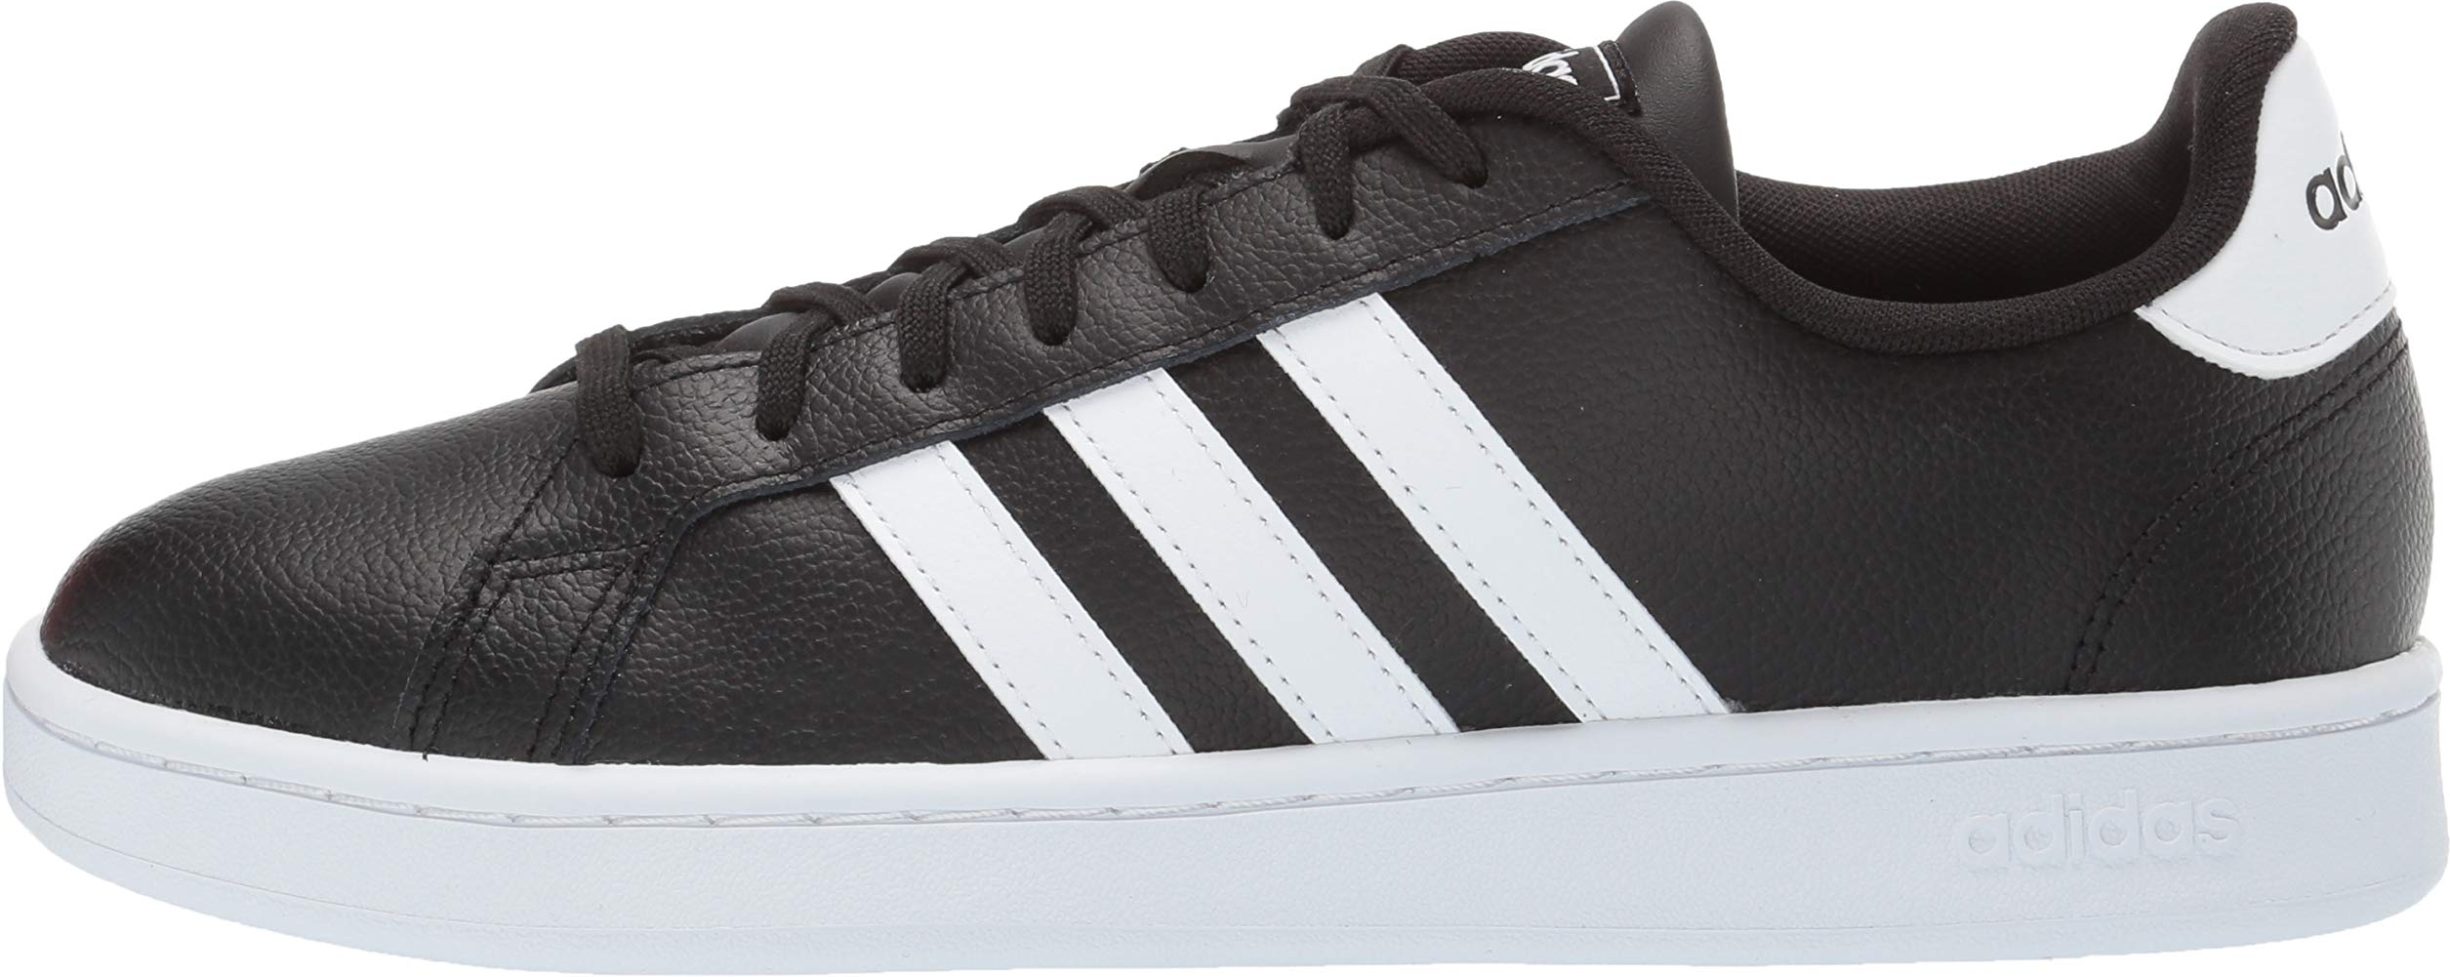 Save 58% on Adidas NEO Sneakers (36 Models in Stock) | RunRepeat